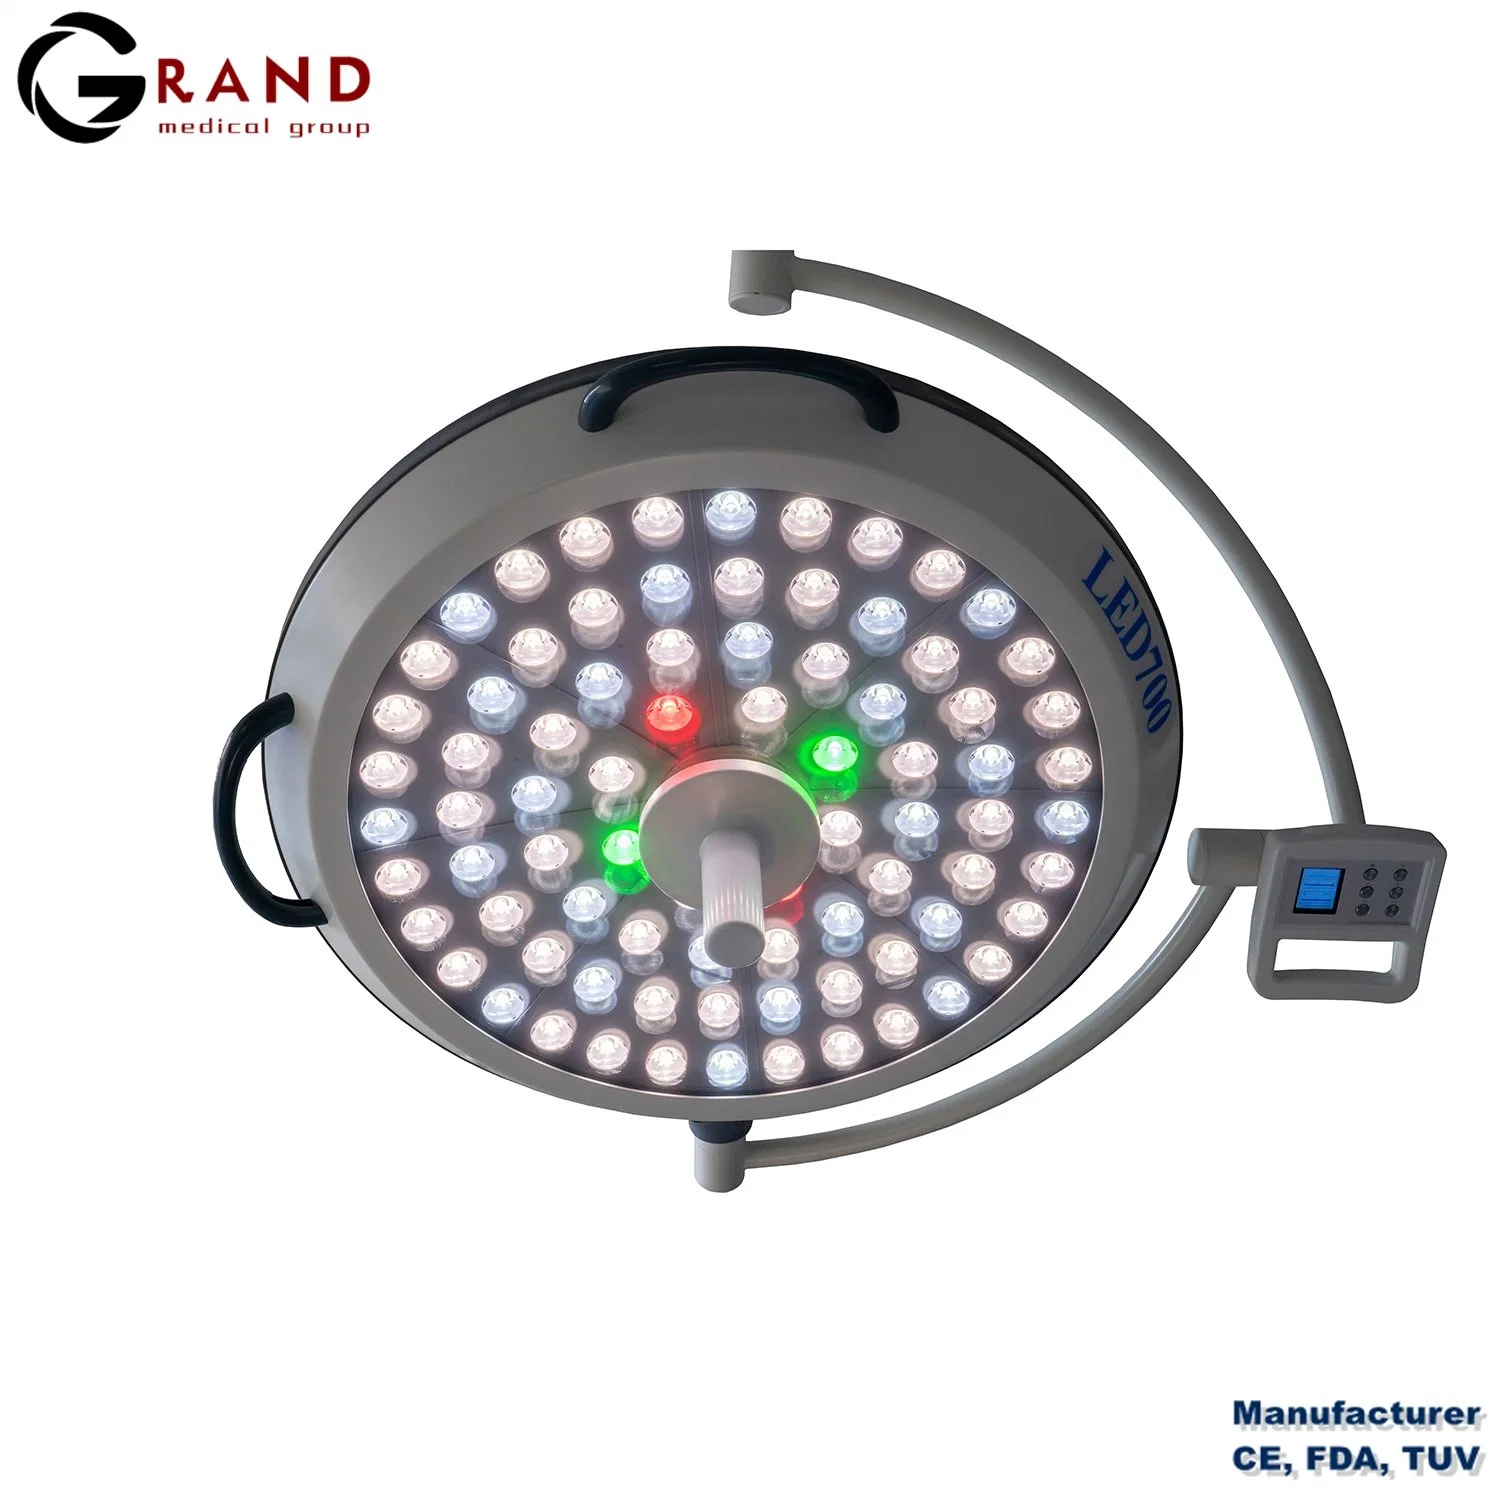 Cheap Price Medical LED Surgical Lights Operating Room Examination Lamp Operation Light Medical Device Hospital Equipment